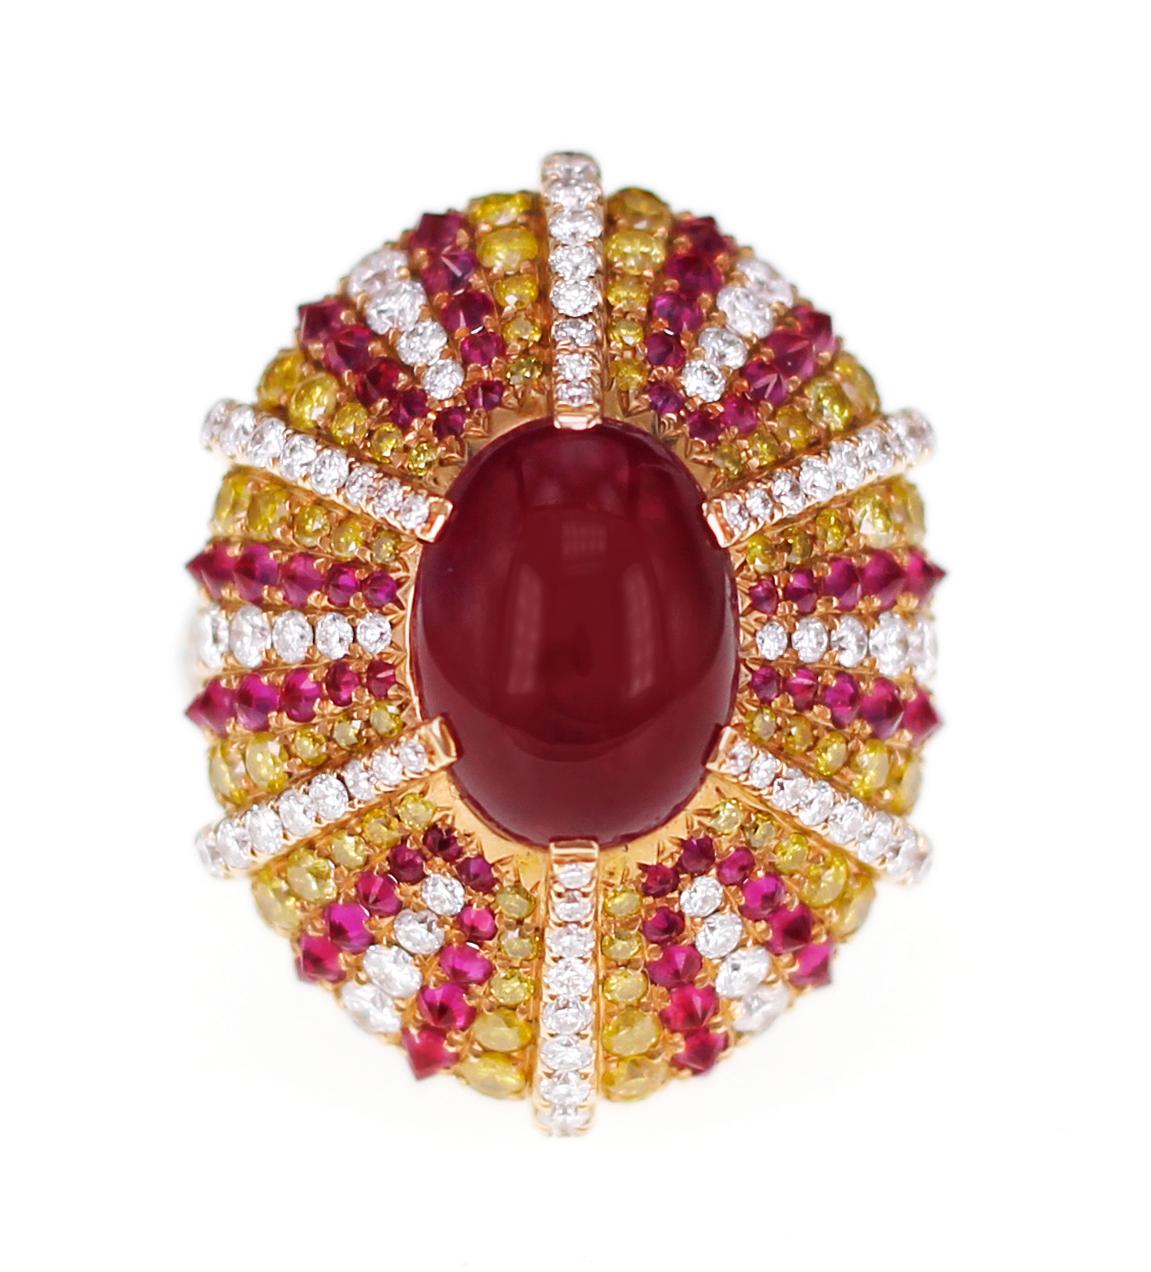 The ring consists of 5.32 carat of Ruby from Thailand. The ruby has 2.69 carat of vivid yellow round brilliant diamond and white round diamond for its company. Also 1.21 carat of Mozambique round brilliant ruby has been used to give it a distinct